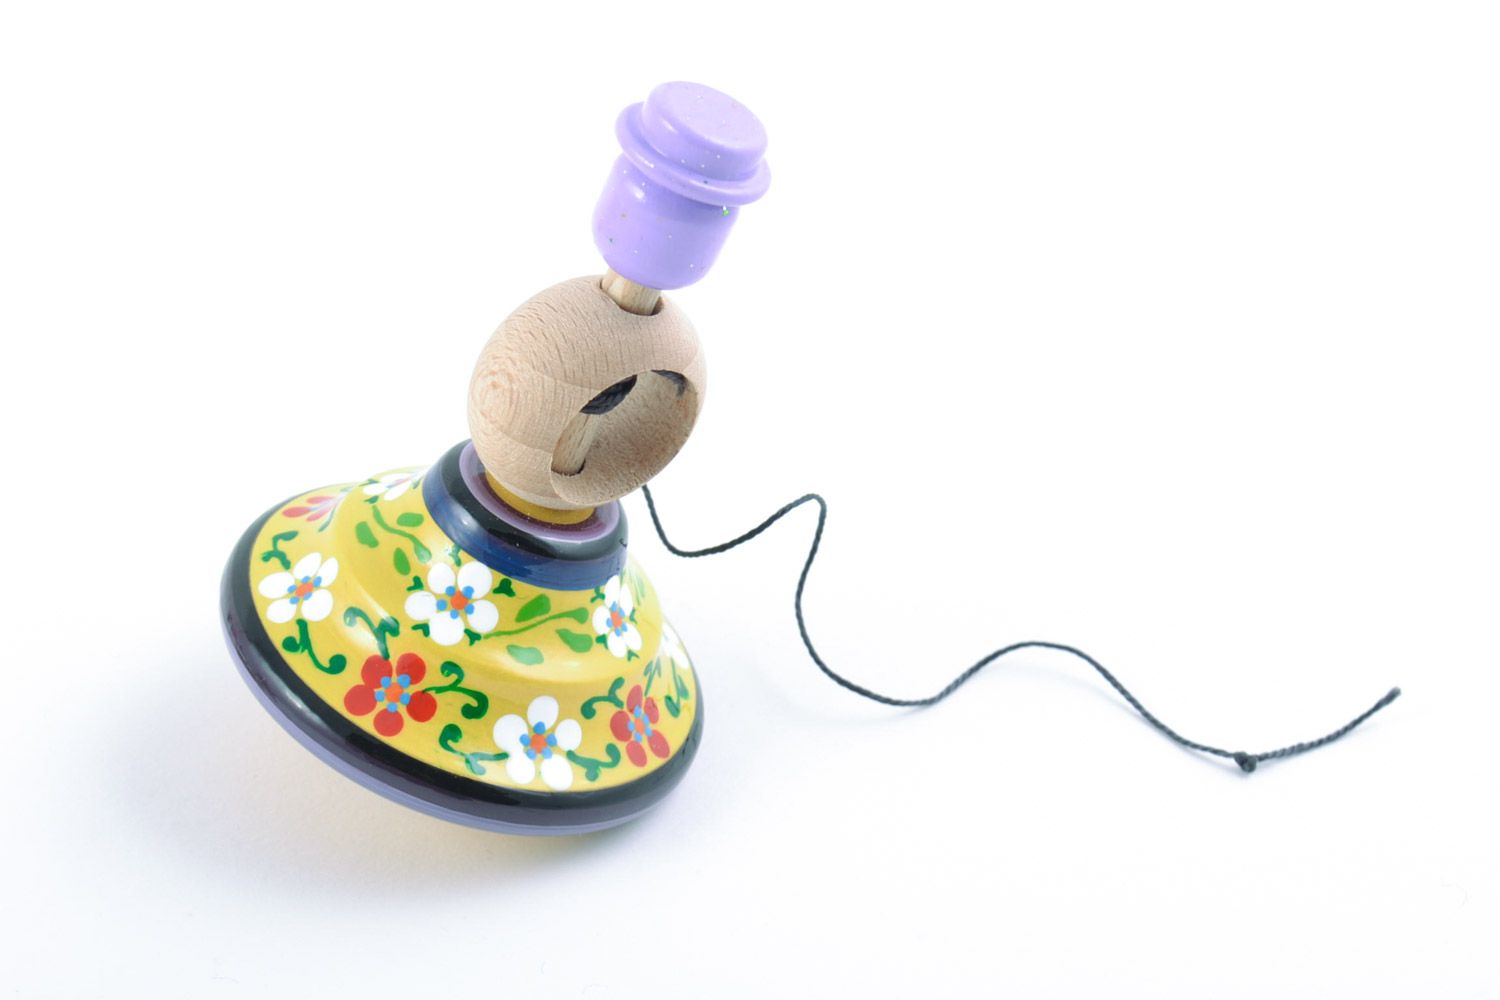 Small decorative painted wooden homemade toy spinning top with floral ornaments photo 5